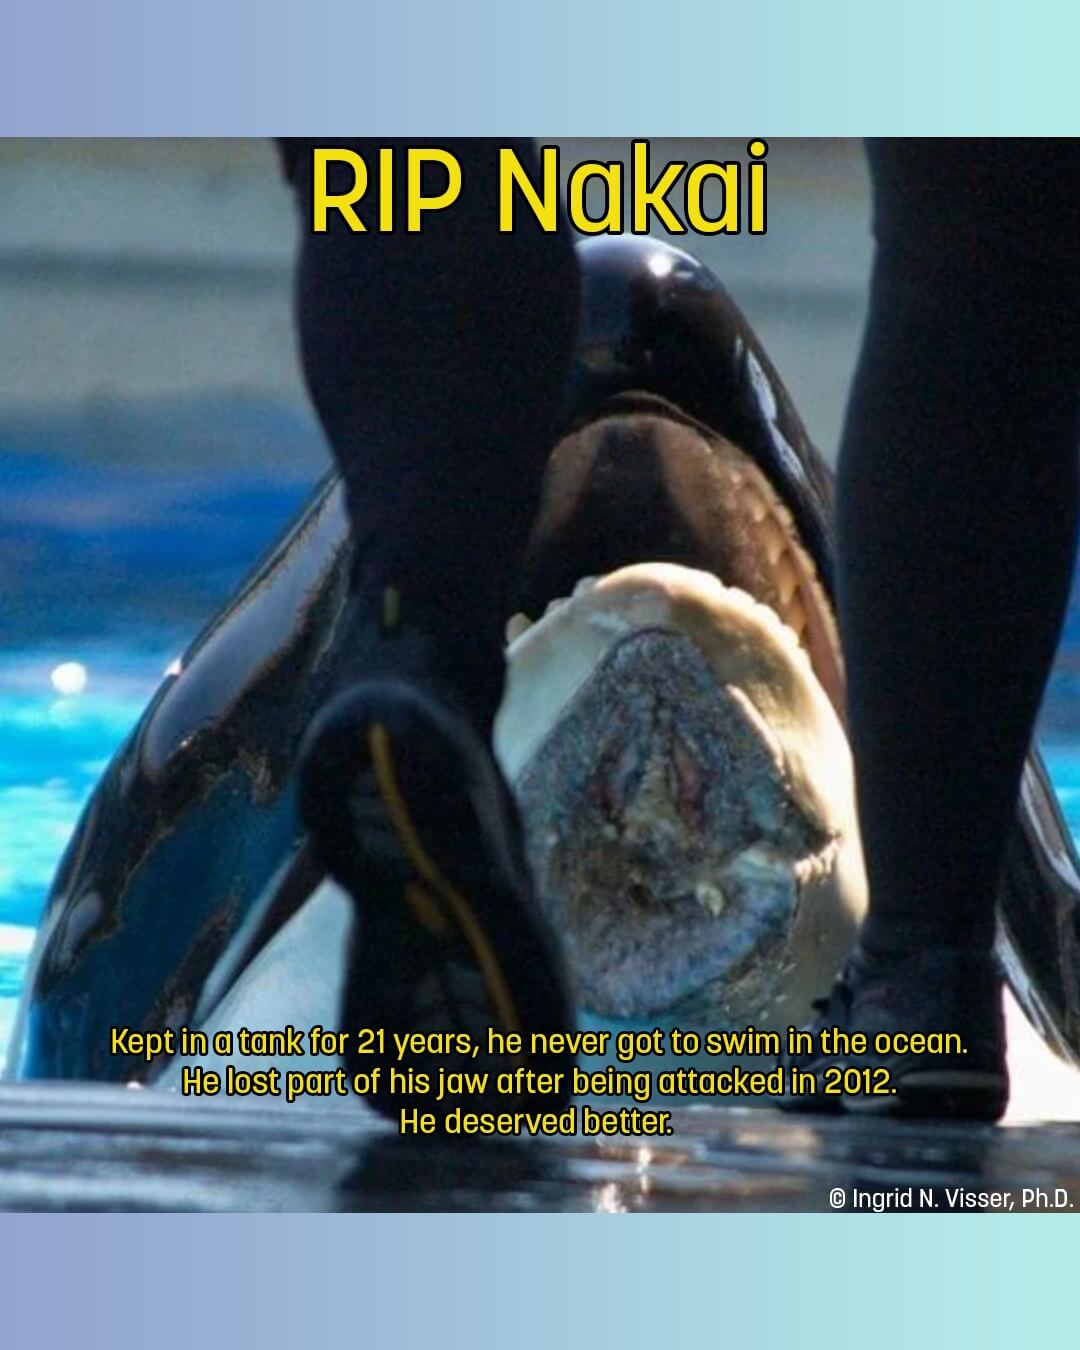 298008963 594437859009187 2398305865376975125 n Animal Transfers and Dolphin Deaths at SeaWorld in 2022